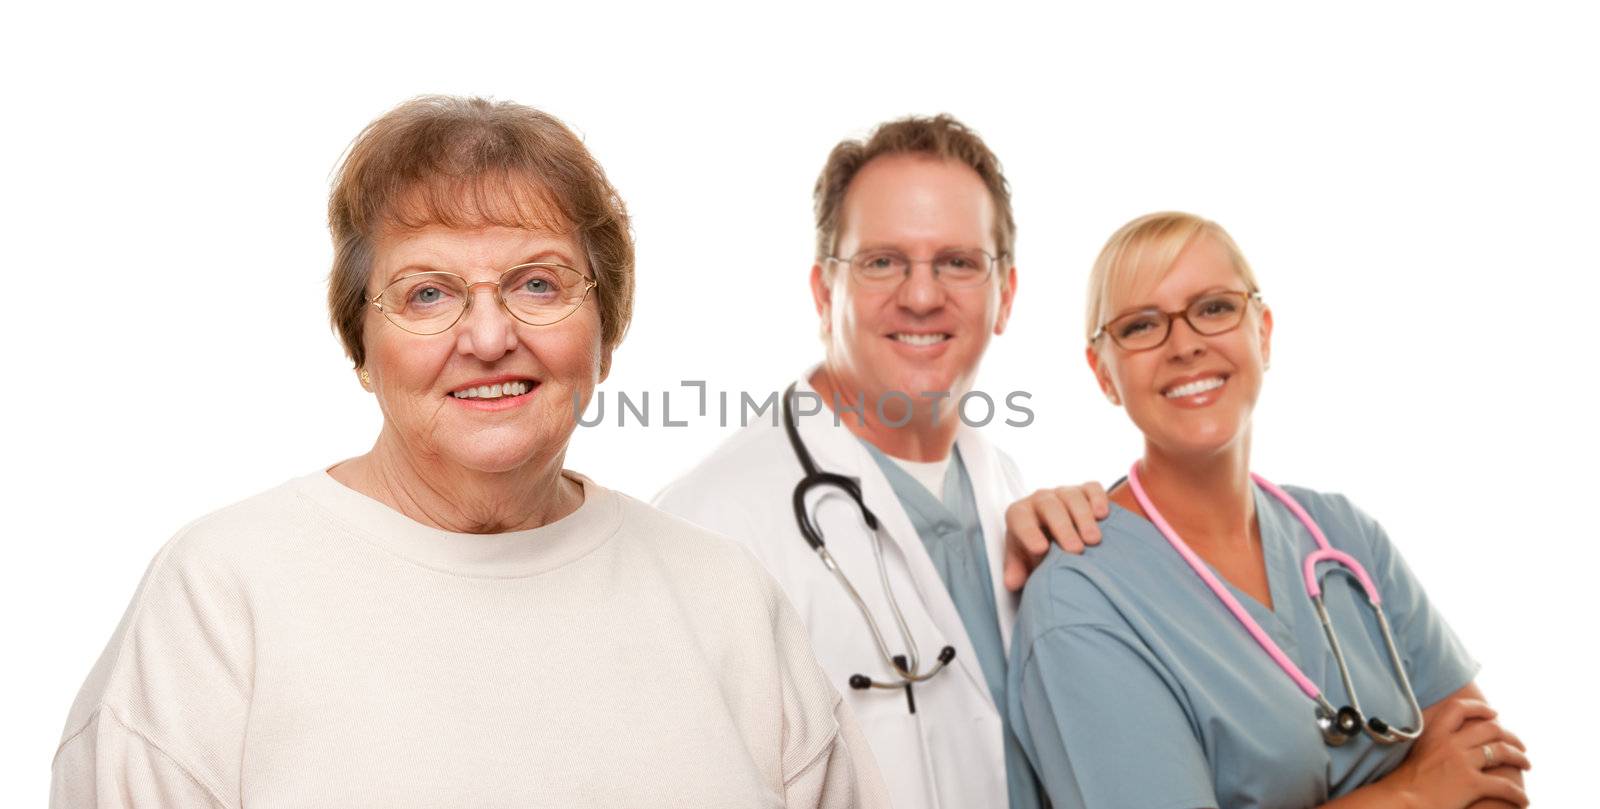 Smiling Senior Woman with Medical Doctor and Nurse Behind by Feverpitched